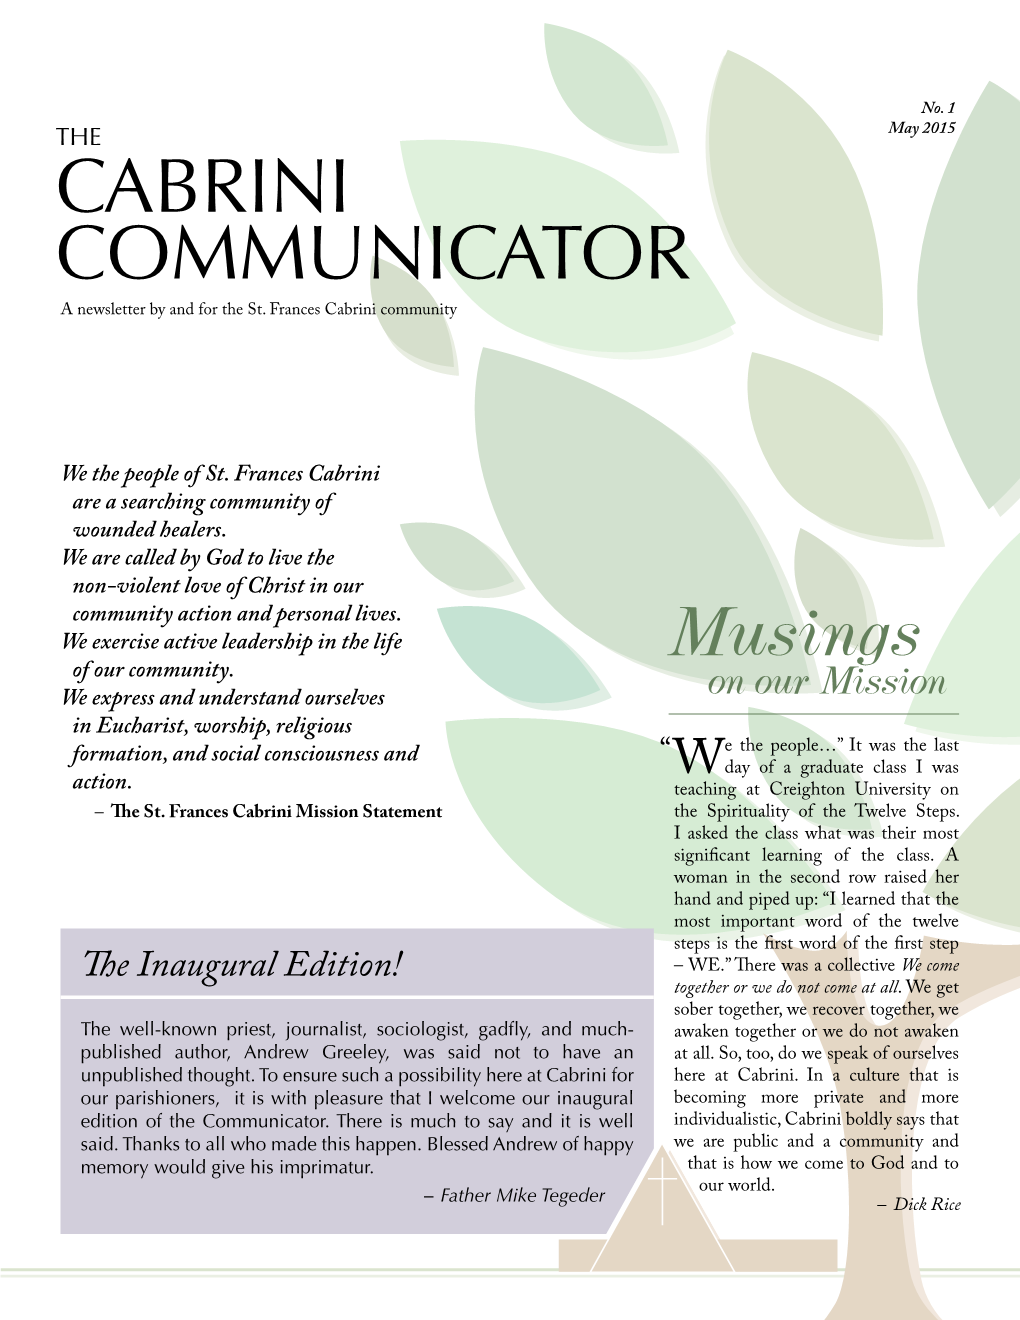 CABRINI COMMUNICATOR a Newsletter by and for the St